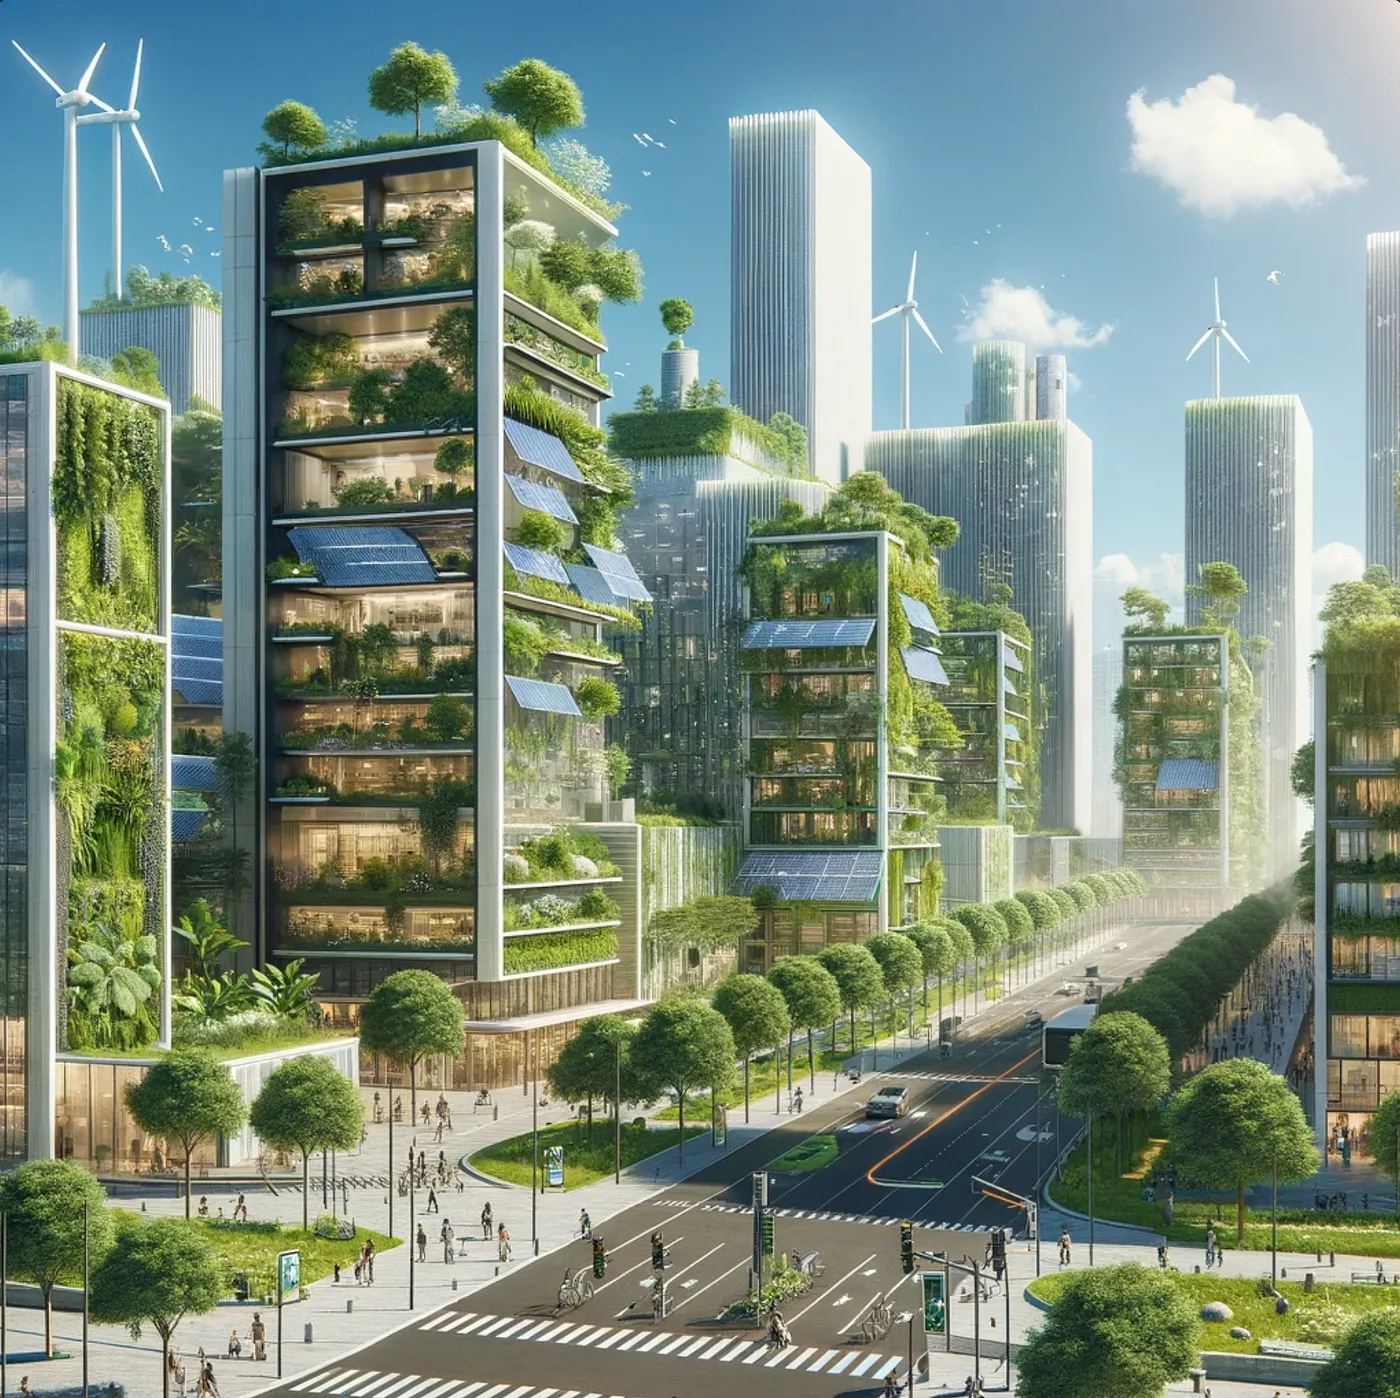 Sustainable Environment - Image depicting green landscapes, renewable energy sources, and eco-friendly practices.